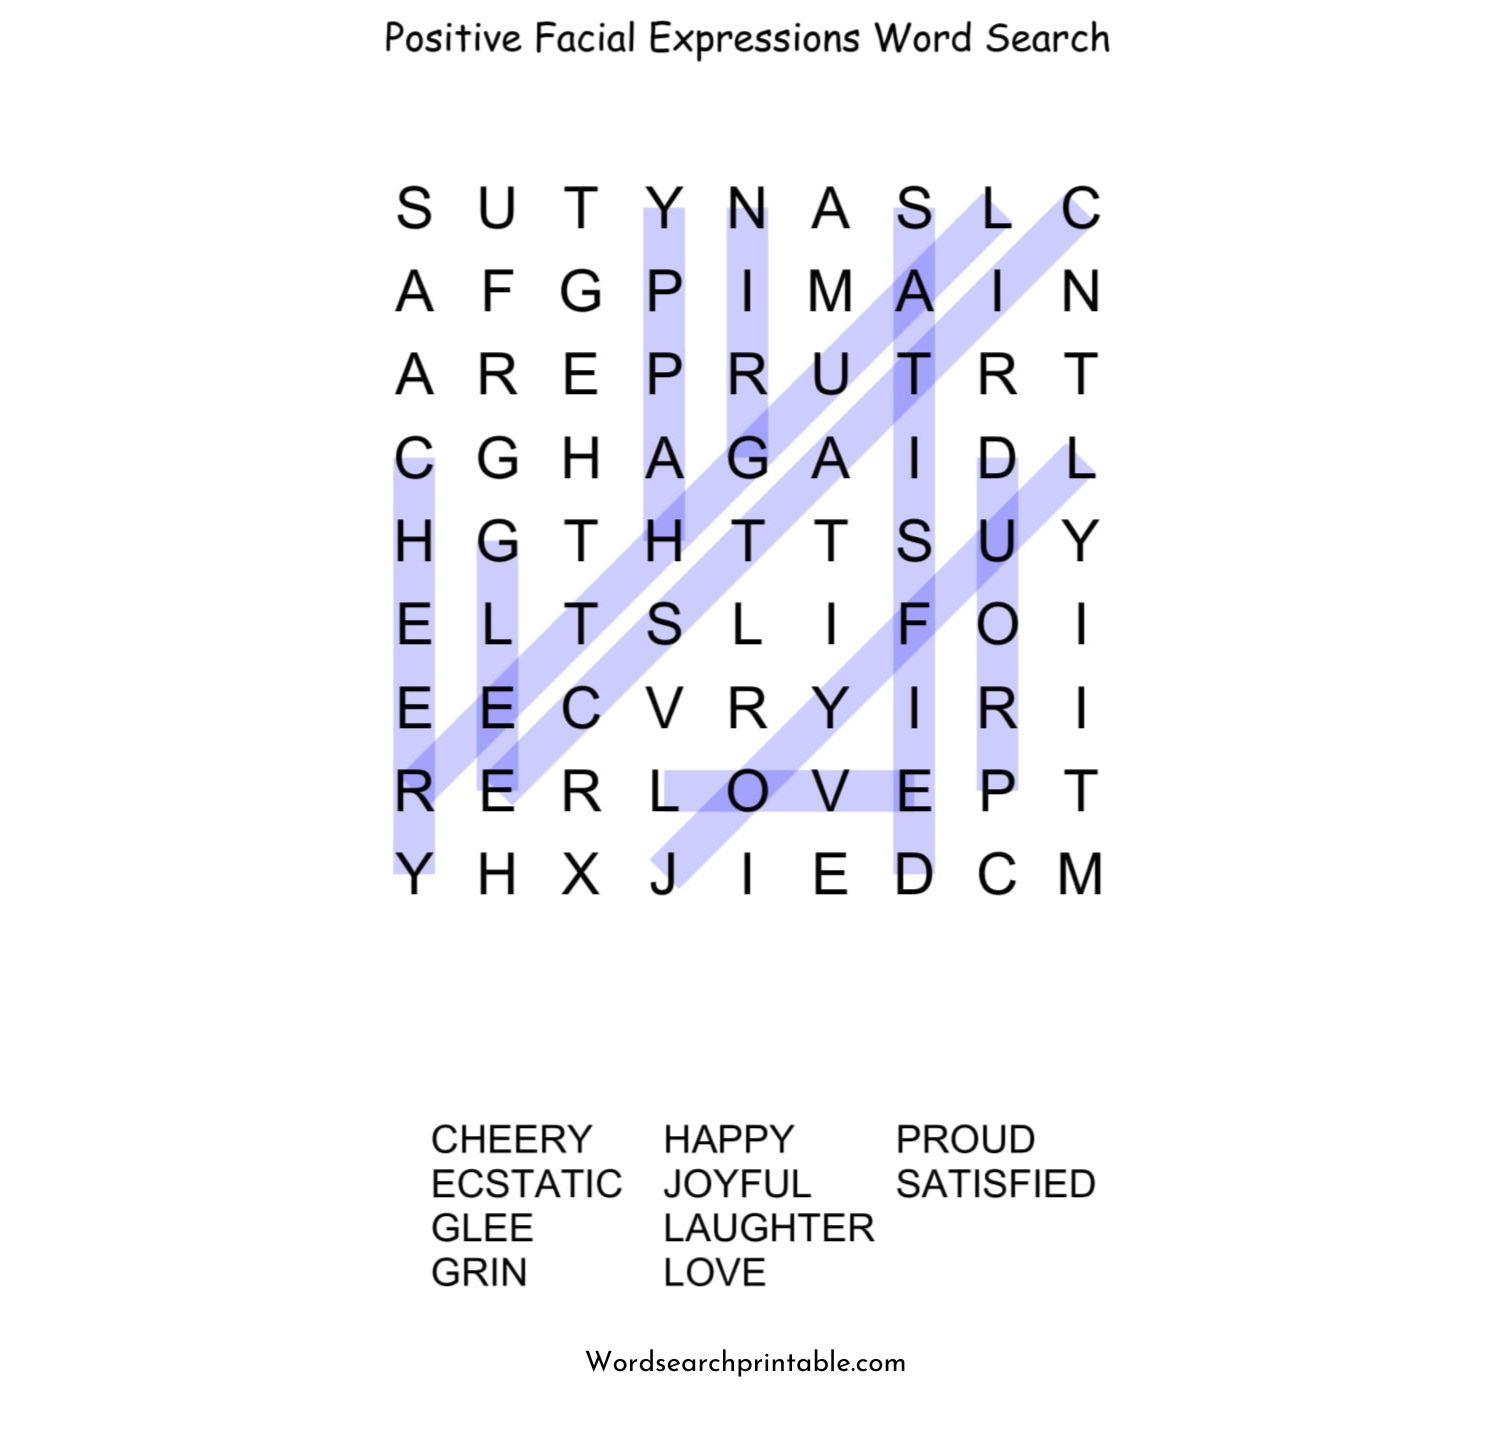 positive facial expressions word search puzzle solution